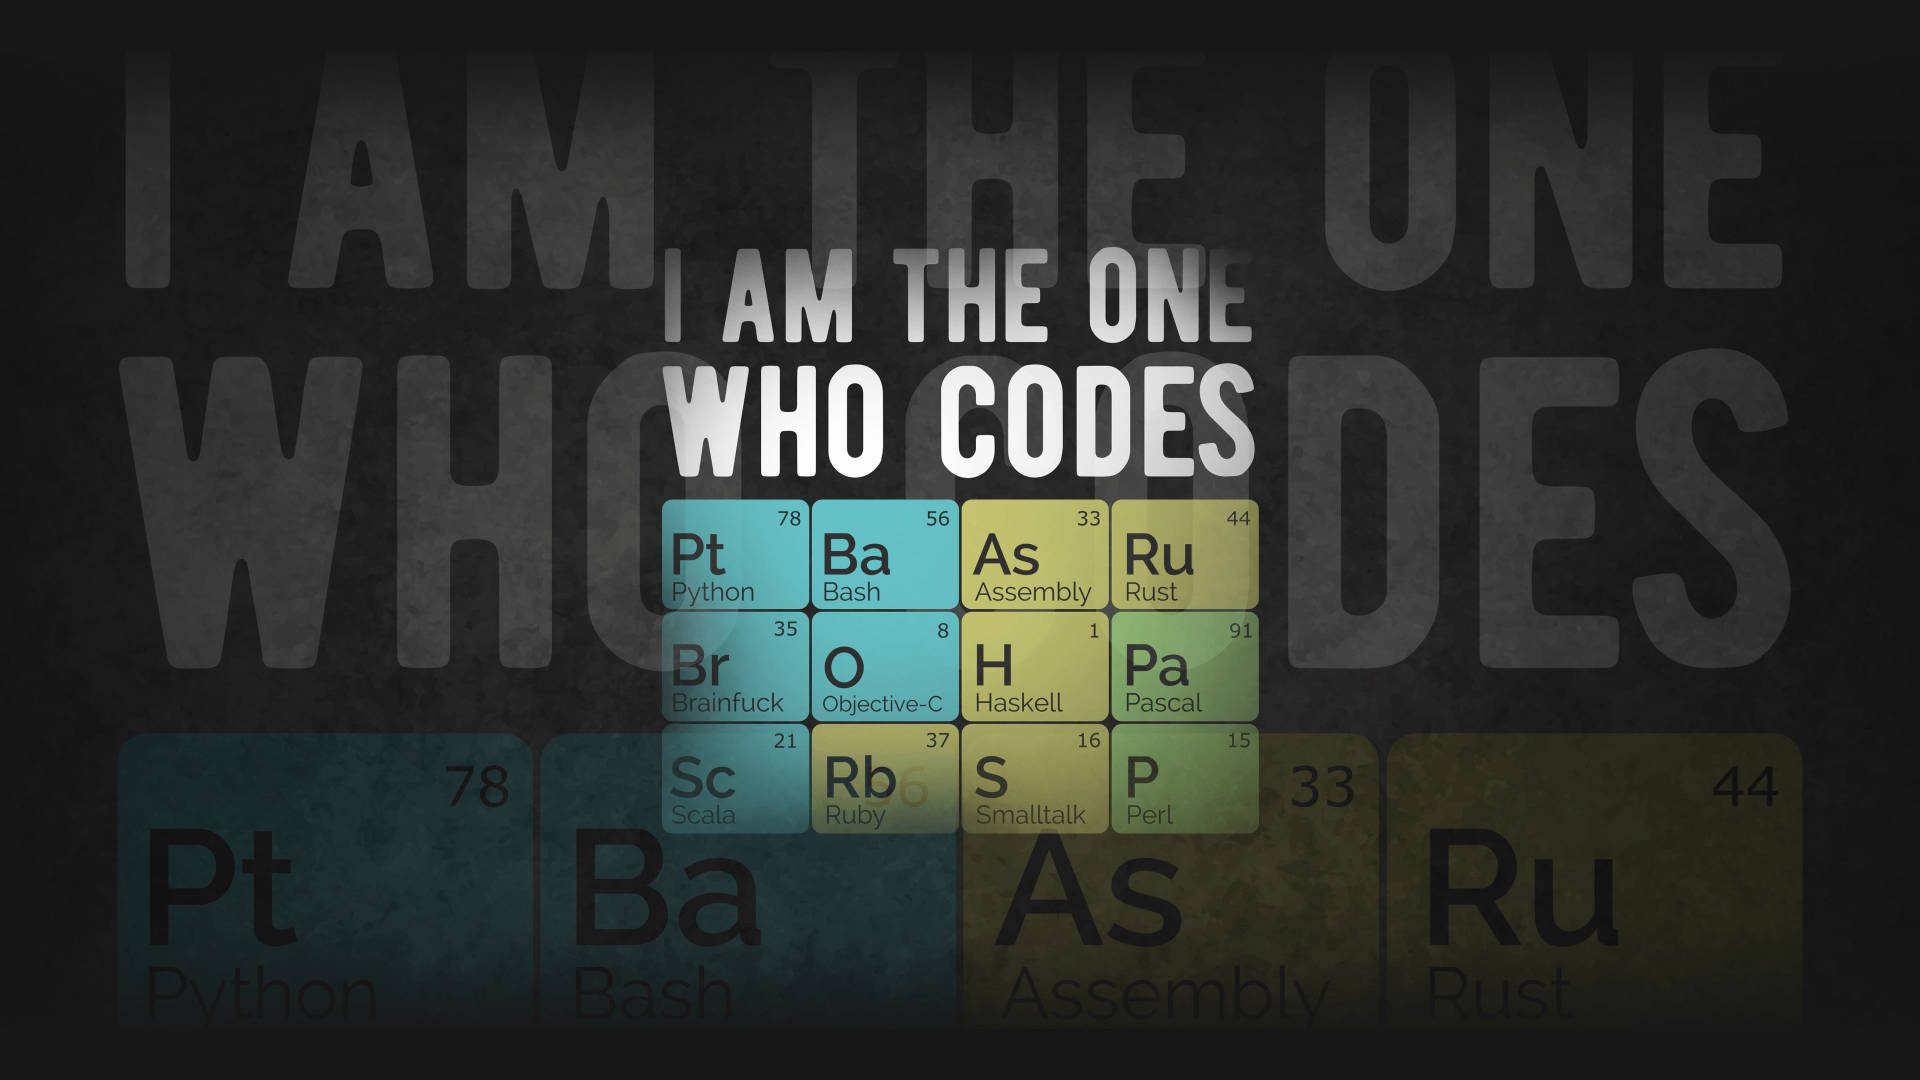 Comprehensive Periodic Table Of Programming Languages